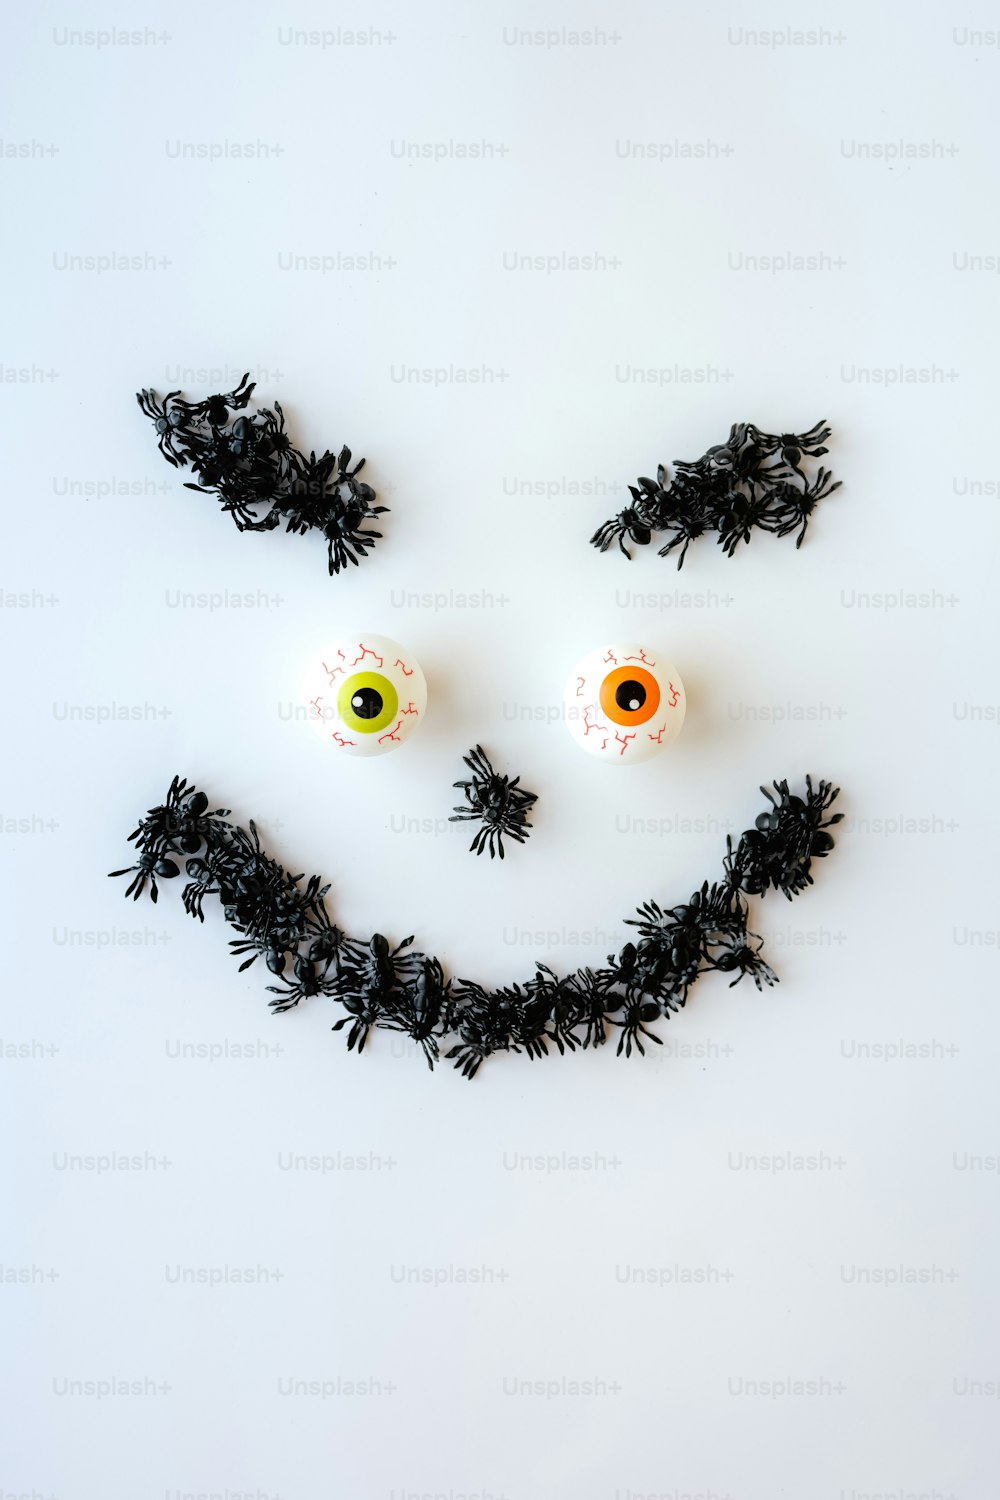 a smiley face made out of black leaves